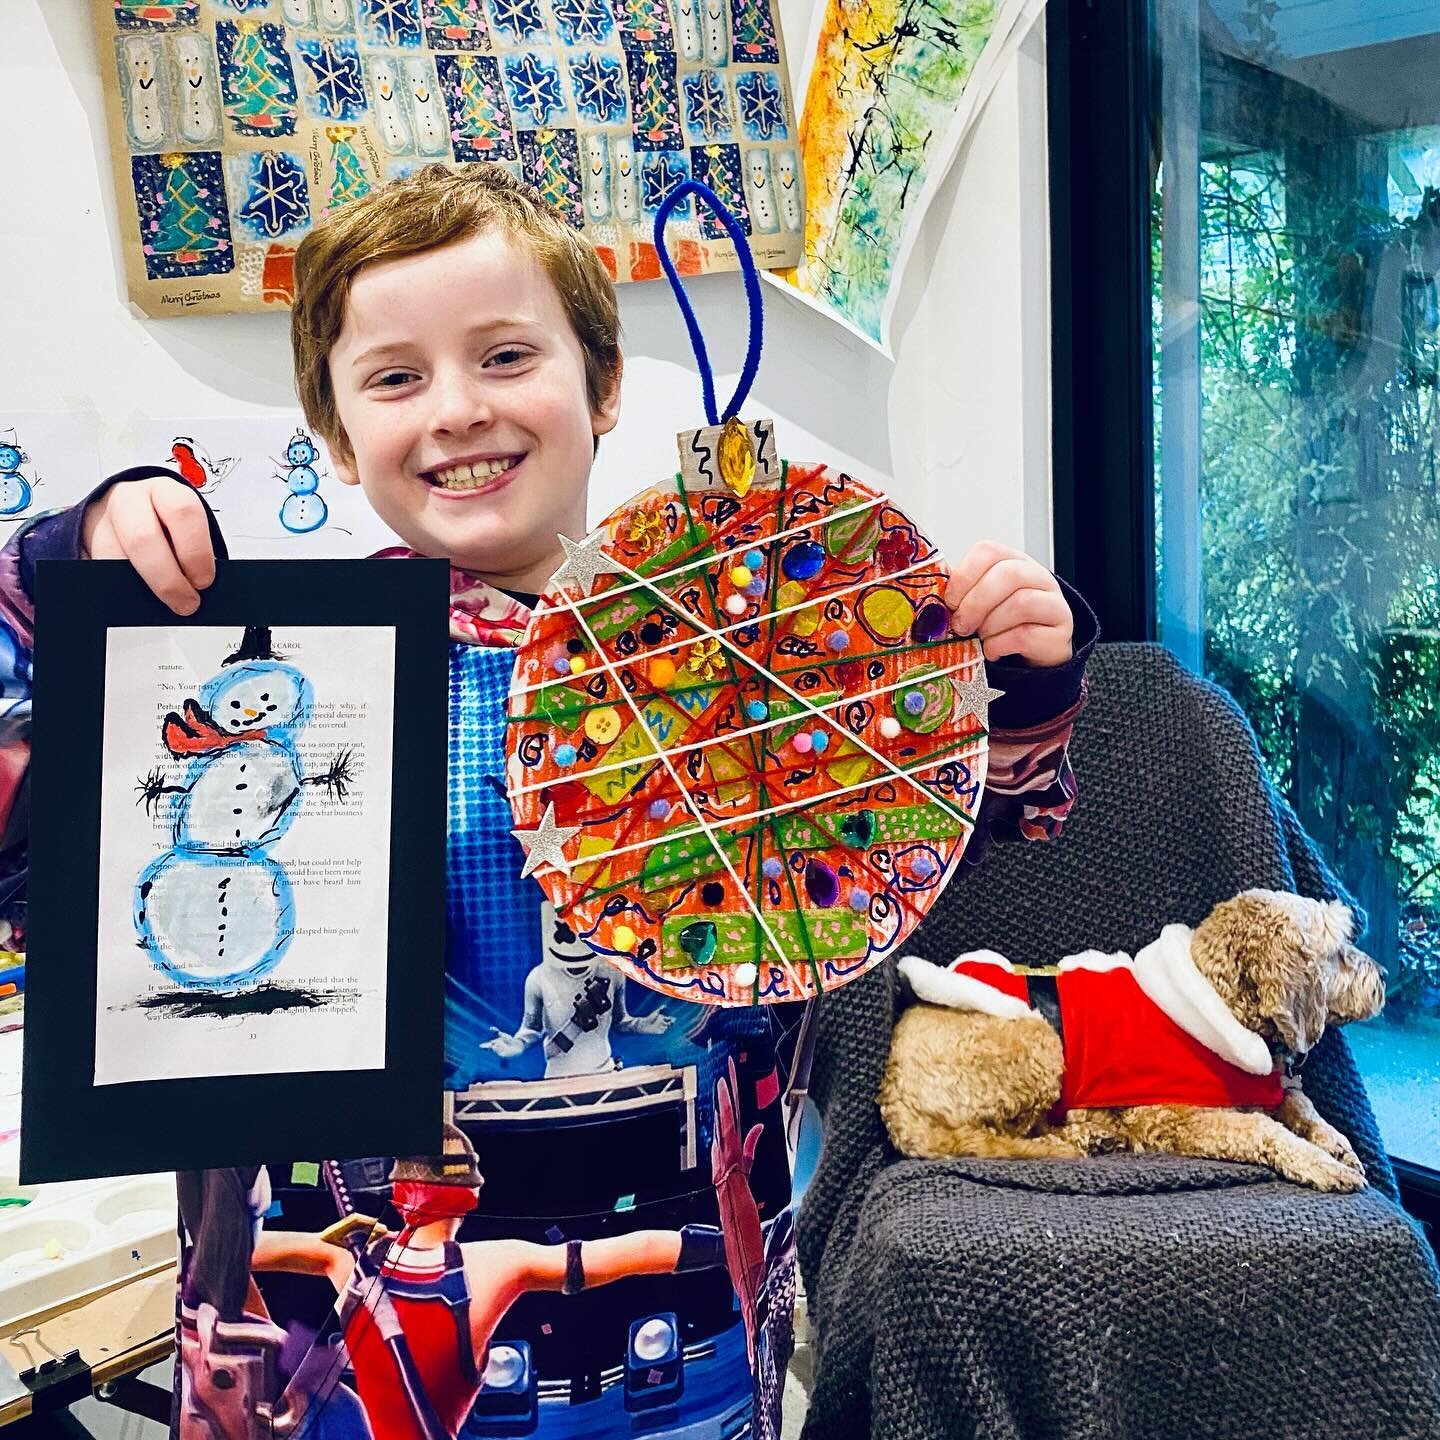 Christmas Cards and Big Baubles 😁

We&rsquo;ve had lots of fun creating cards and baubles from lots of card and bits and bobs! 💖

Wonderful work one and all 🥳 xxx
.
.
.
.
.
#christmascrafts #baubles #christmascards #pompoms #colour #pattern #bitsa